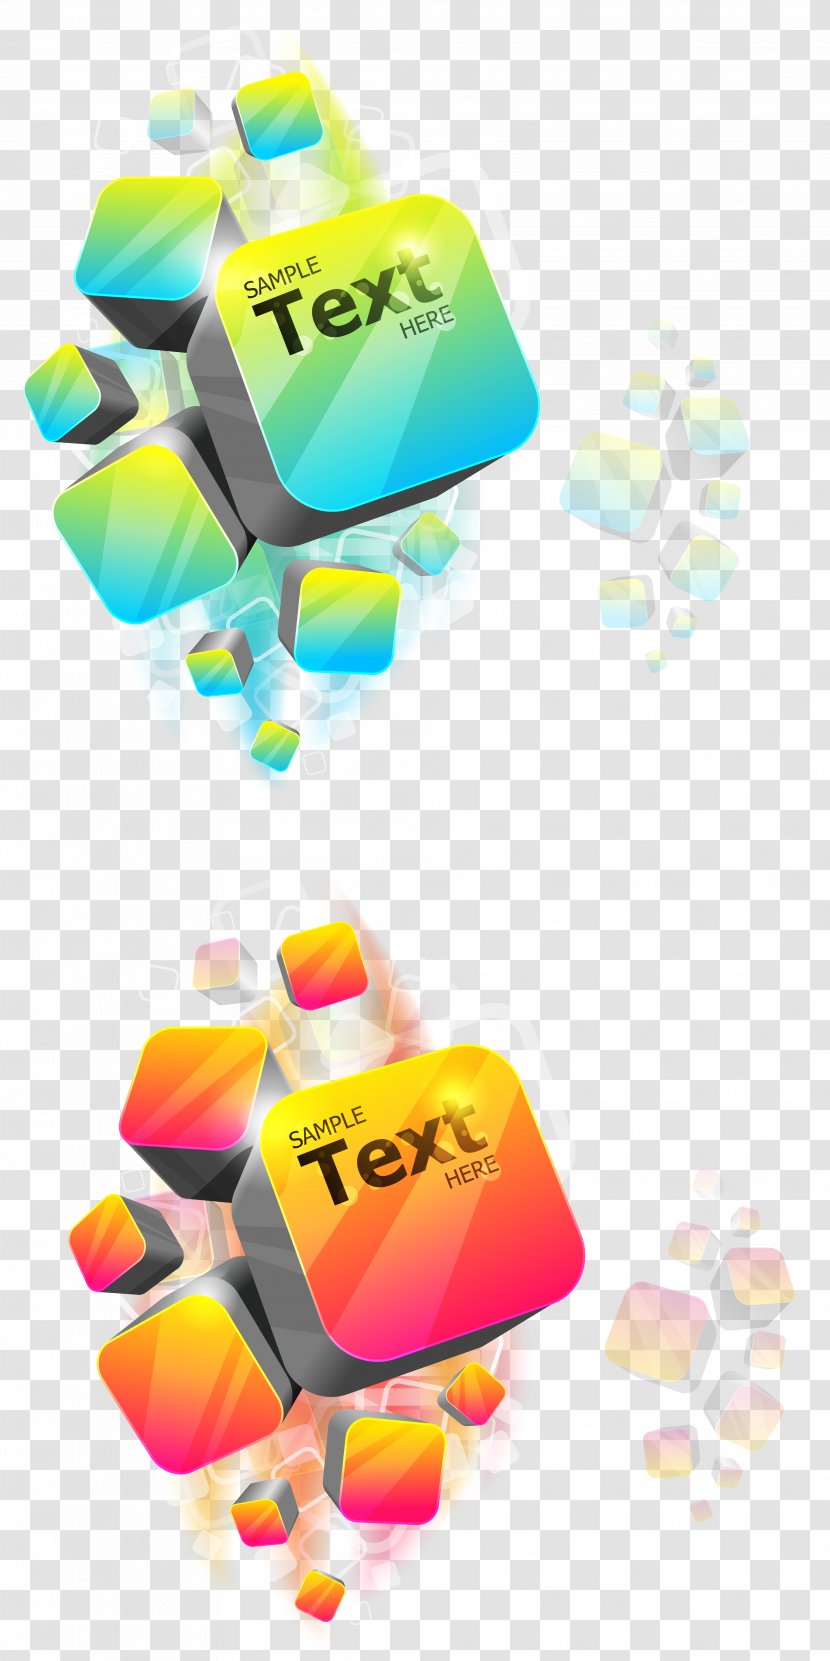 Cube - Yellow - Technology Transparent PNG